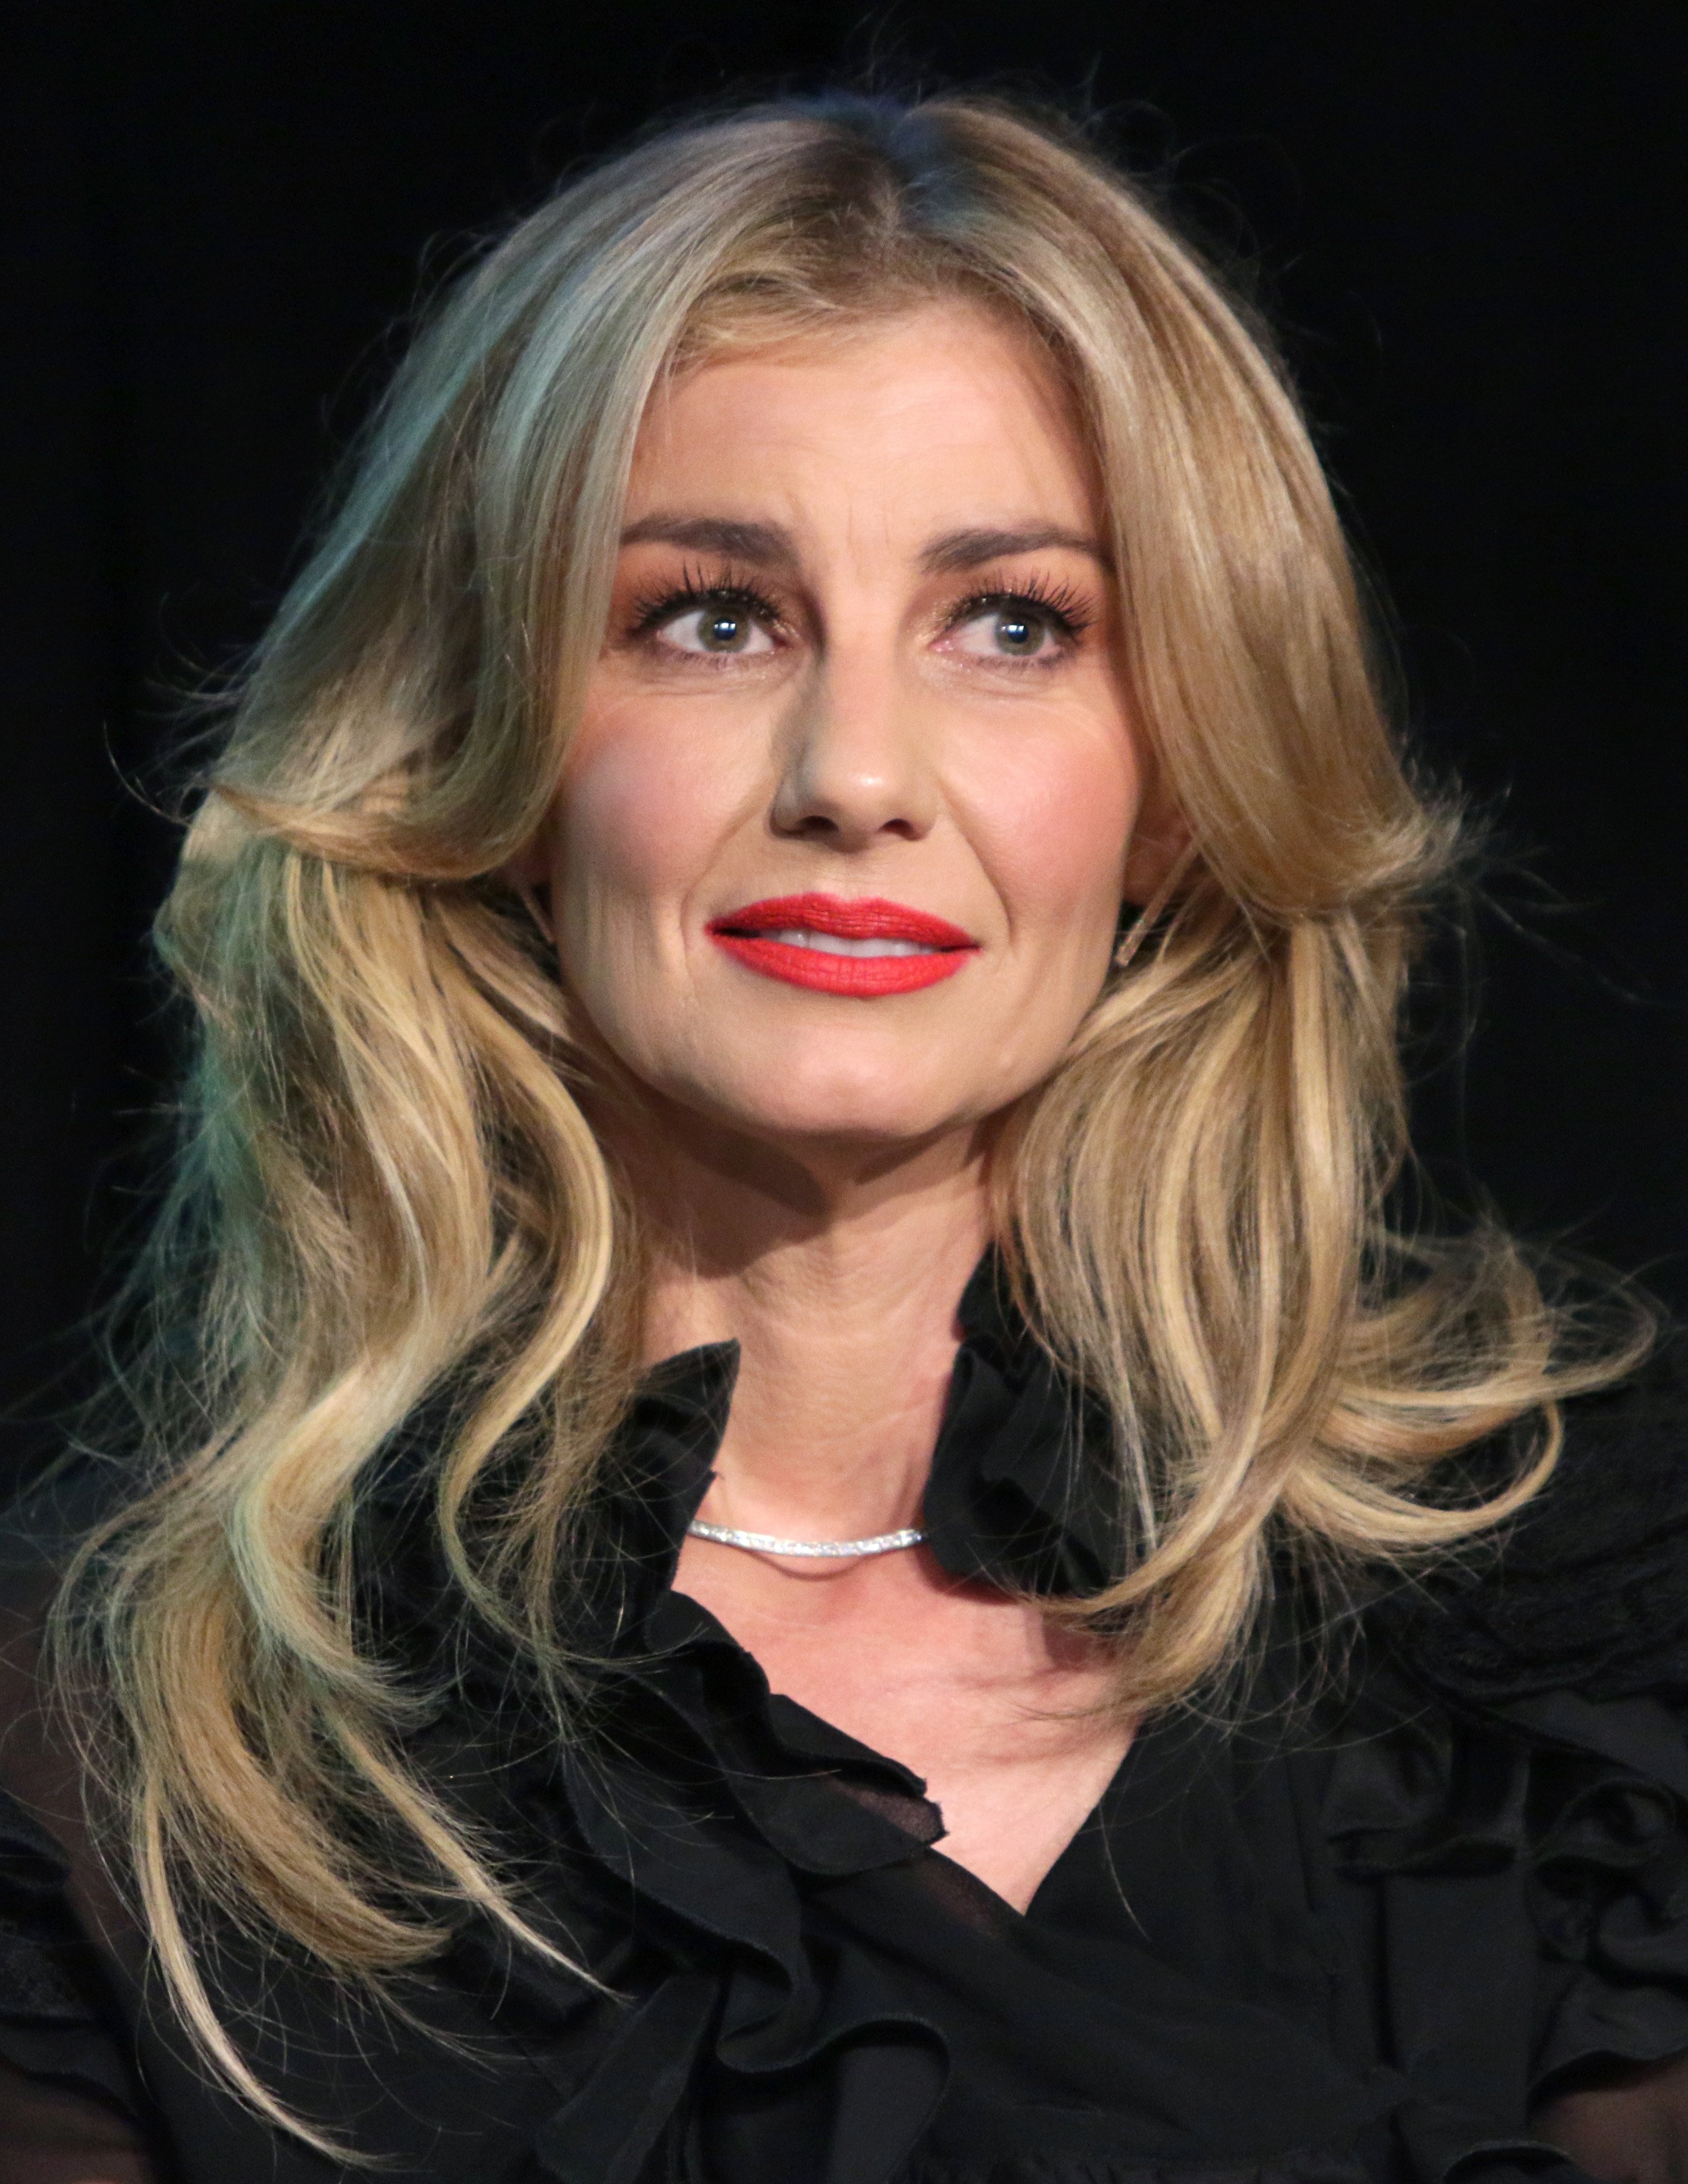 Faith Hill speaks during the Billboard 2017 Touring Conference - Legends Of Live: Tim McGraw And Faith Hill at Montage Beverly Hills on November 14, 2017 | Photo: GettyImages